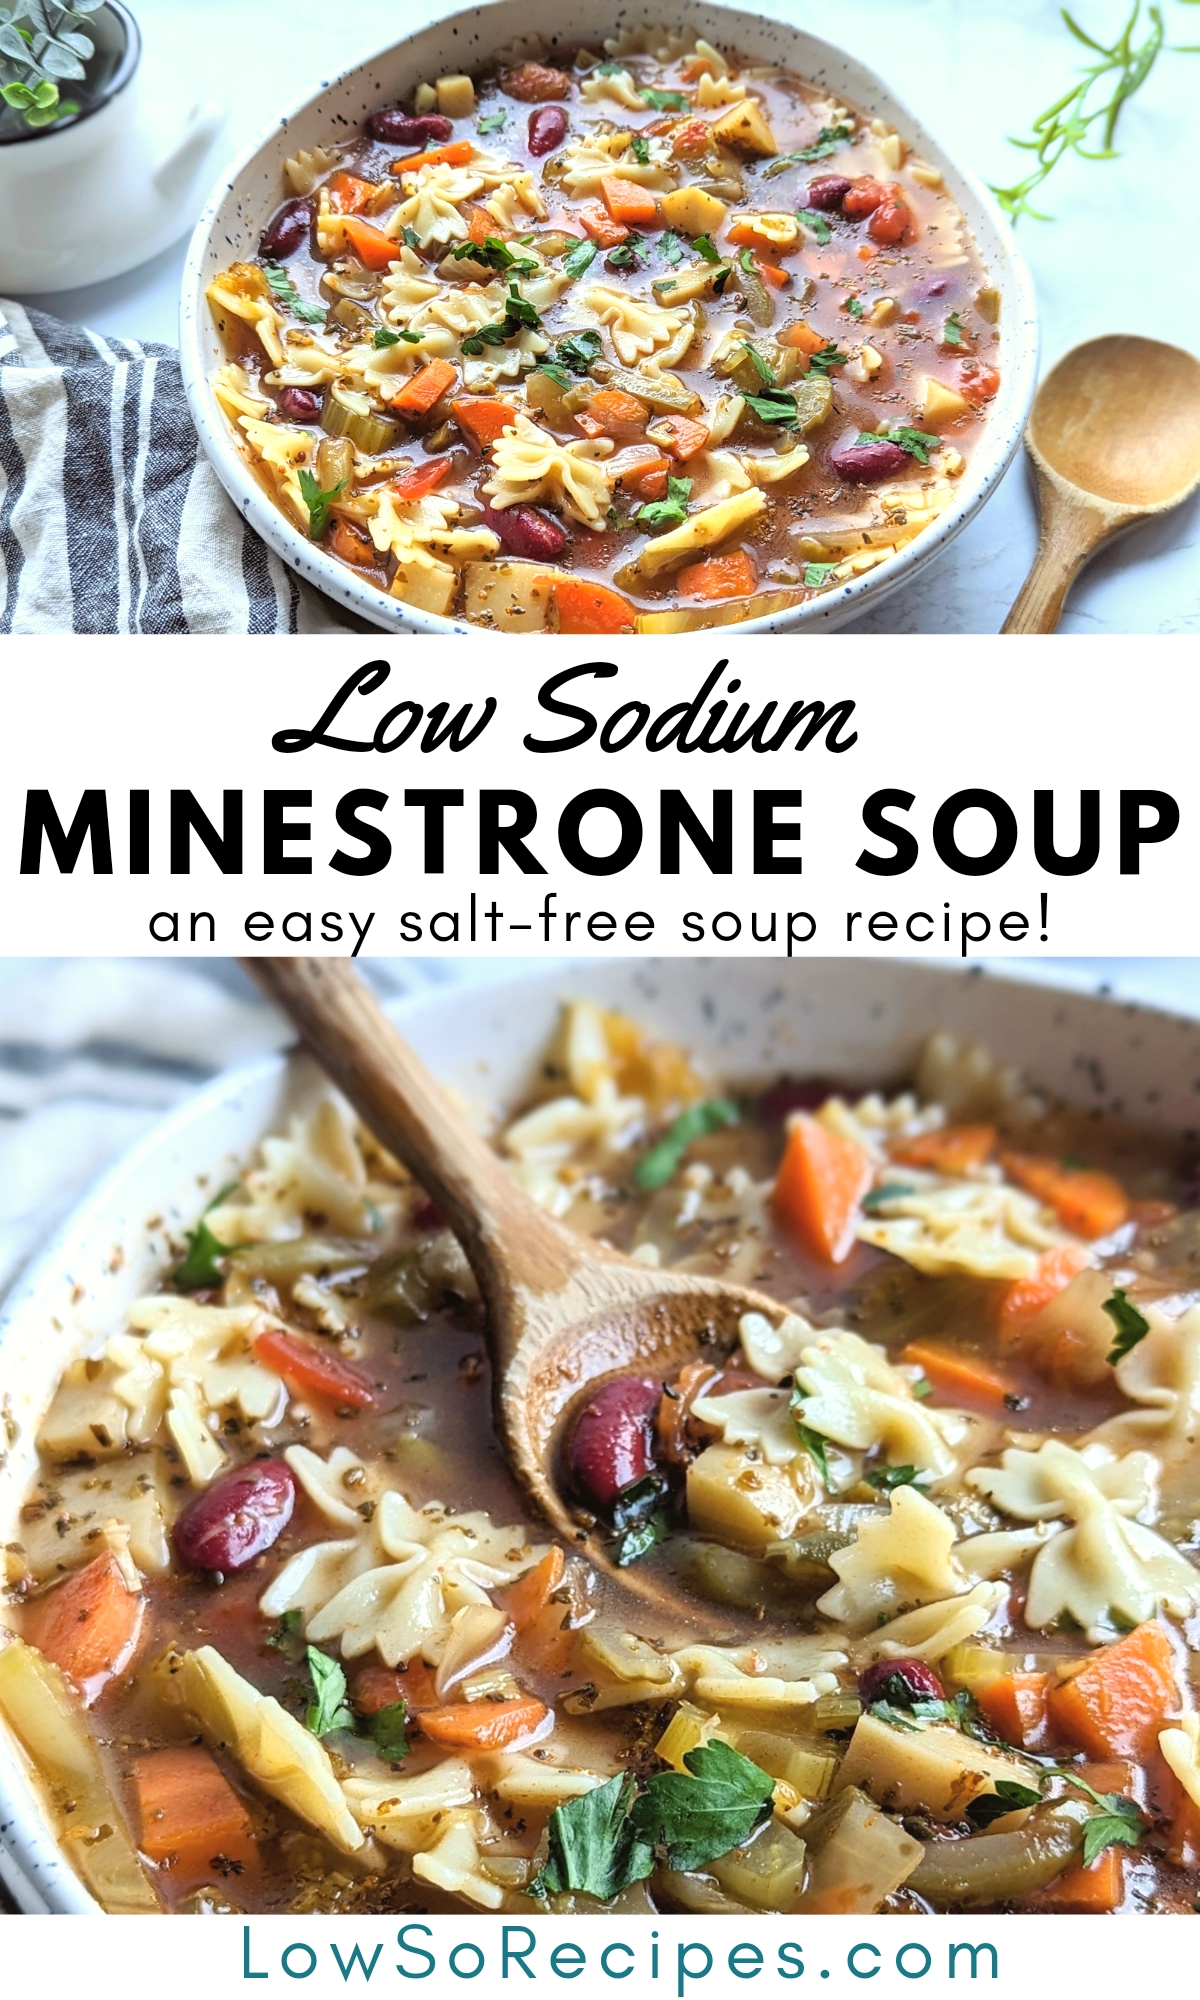 low sodium minestrone soup recipe vegetarian no salt added soups meatless bean and pasta soup